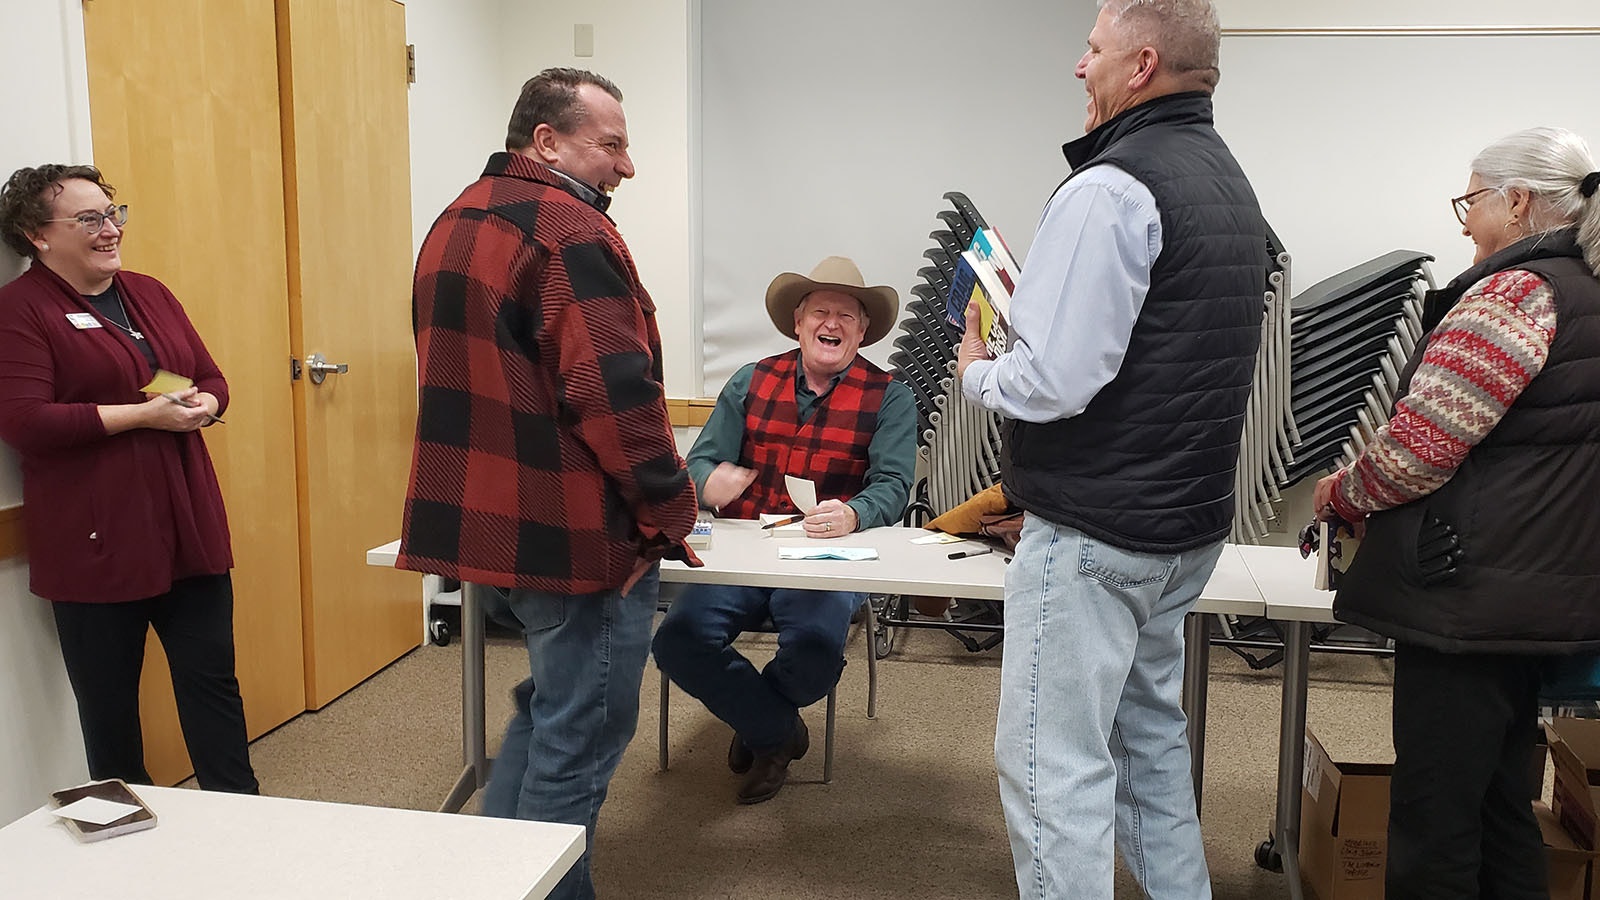 Laramie County Sheriff Brian Kozak, left, and DeputyTim Cameron laugh with Craig Johnson at one of the author's jokes. They were among those with an armful of books to sign after a recent short story reading for Johnson's annual Christmas tour.